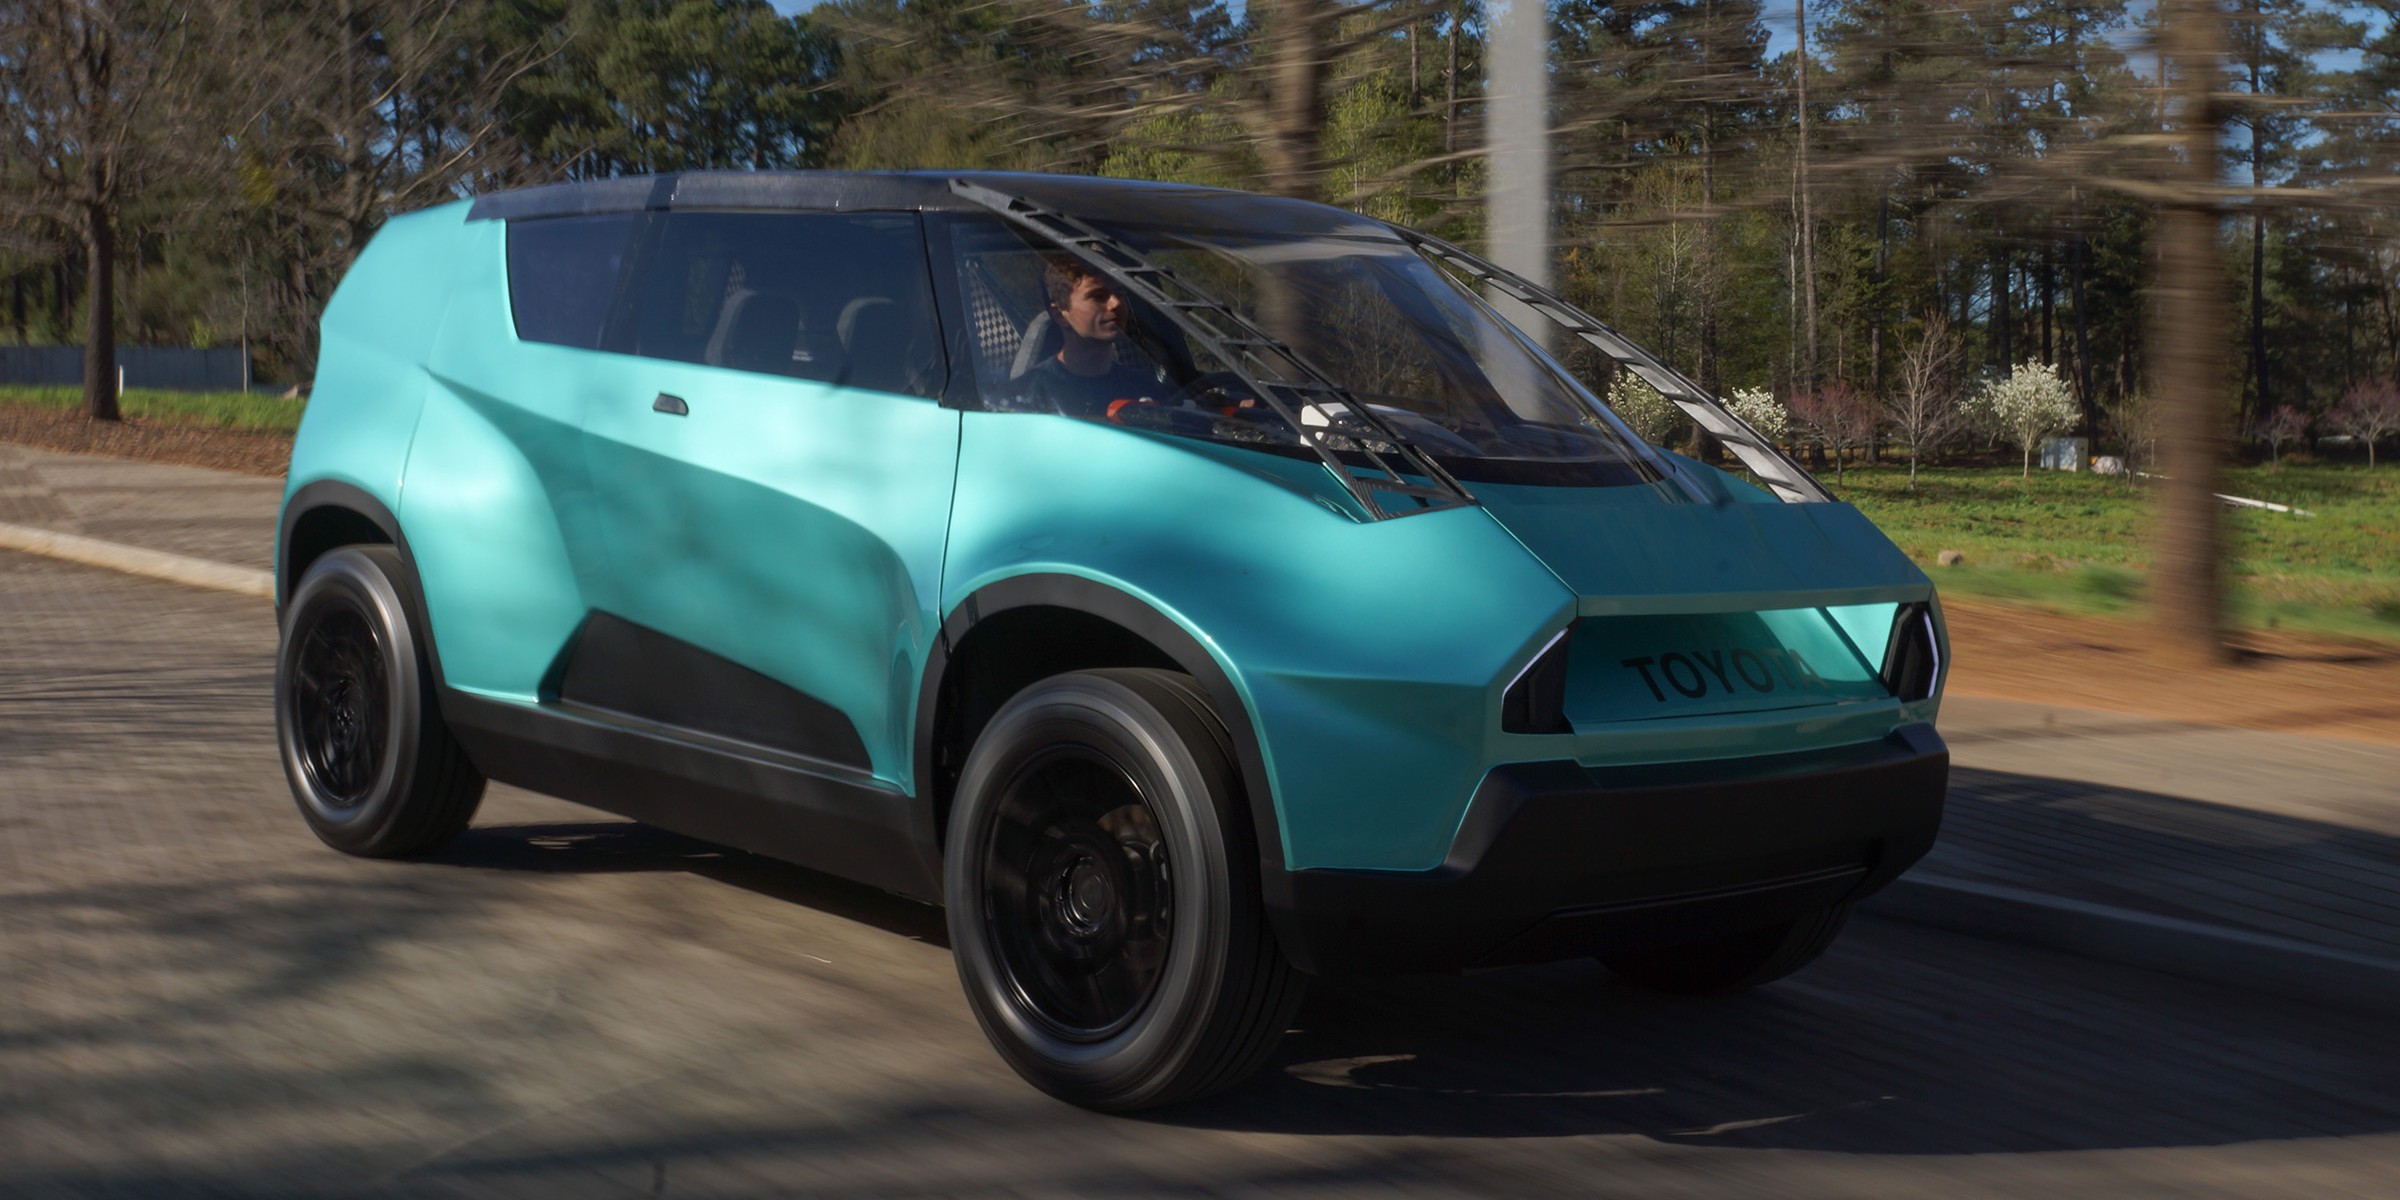 Toyota unveils a new EV concept and it's another 'weirdmobile